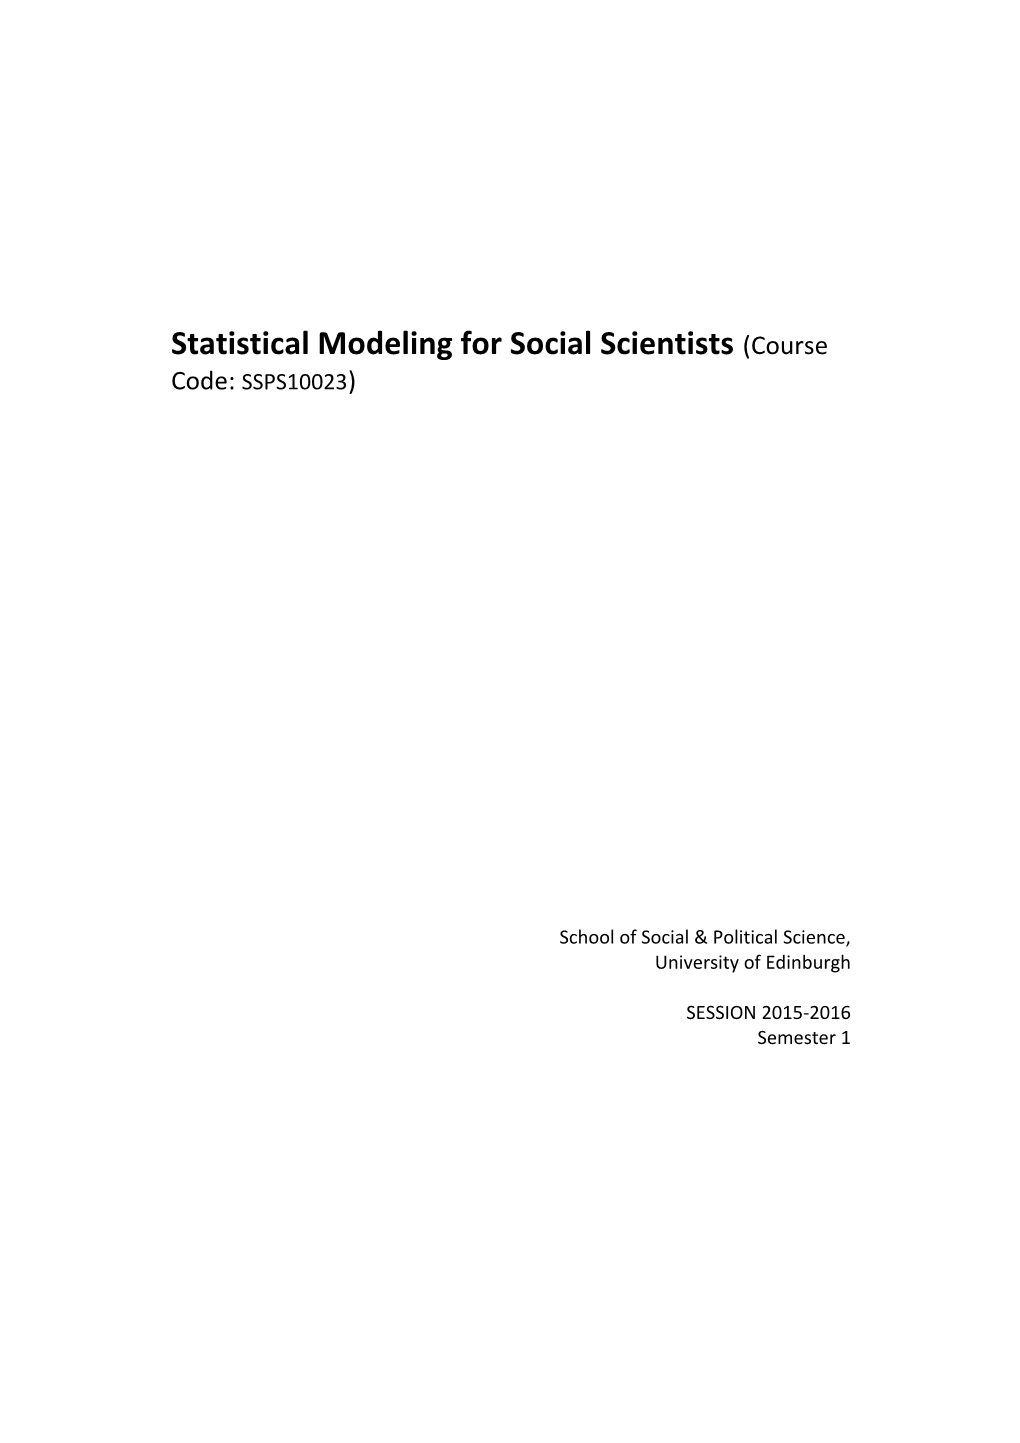 Statistical Modeling for Social Scientists (Course Code: SSPS10023)